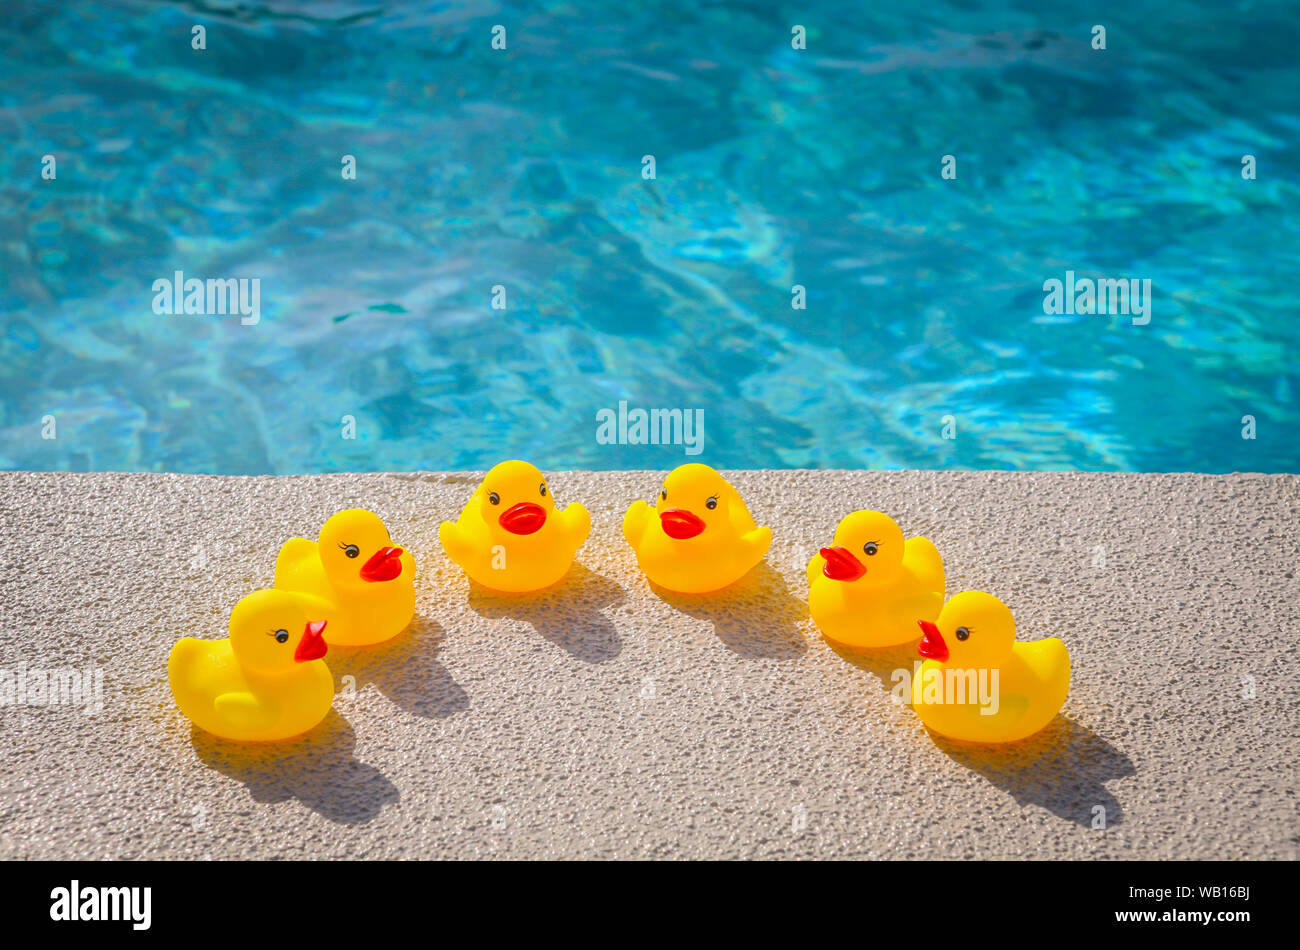 Rubber ducks basking in the sunshine at a swimming pool Stock Photo